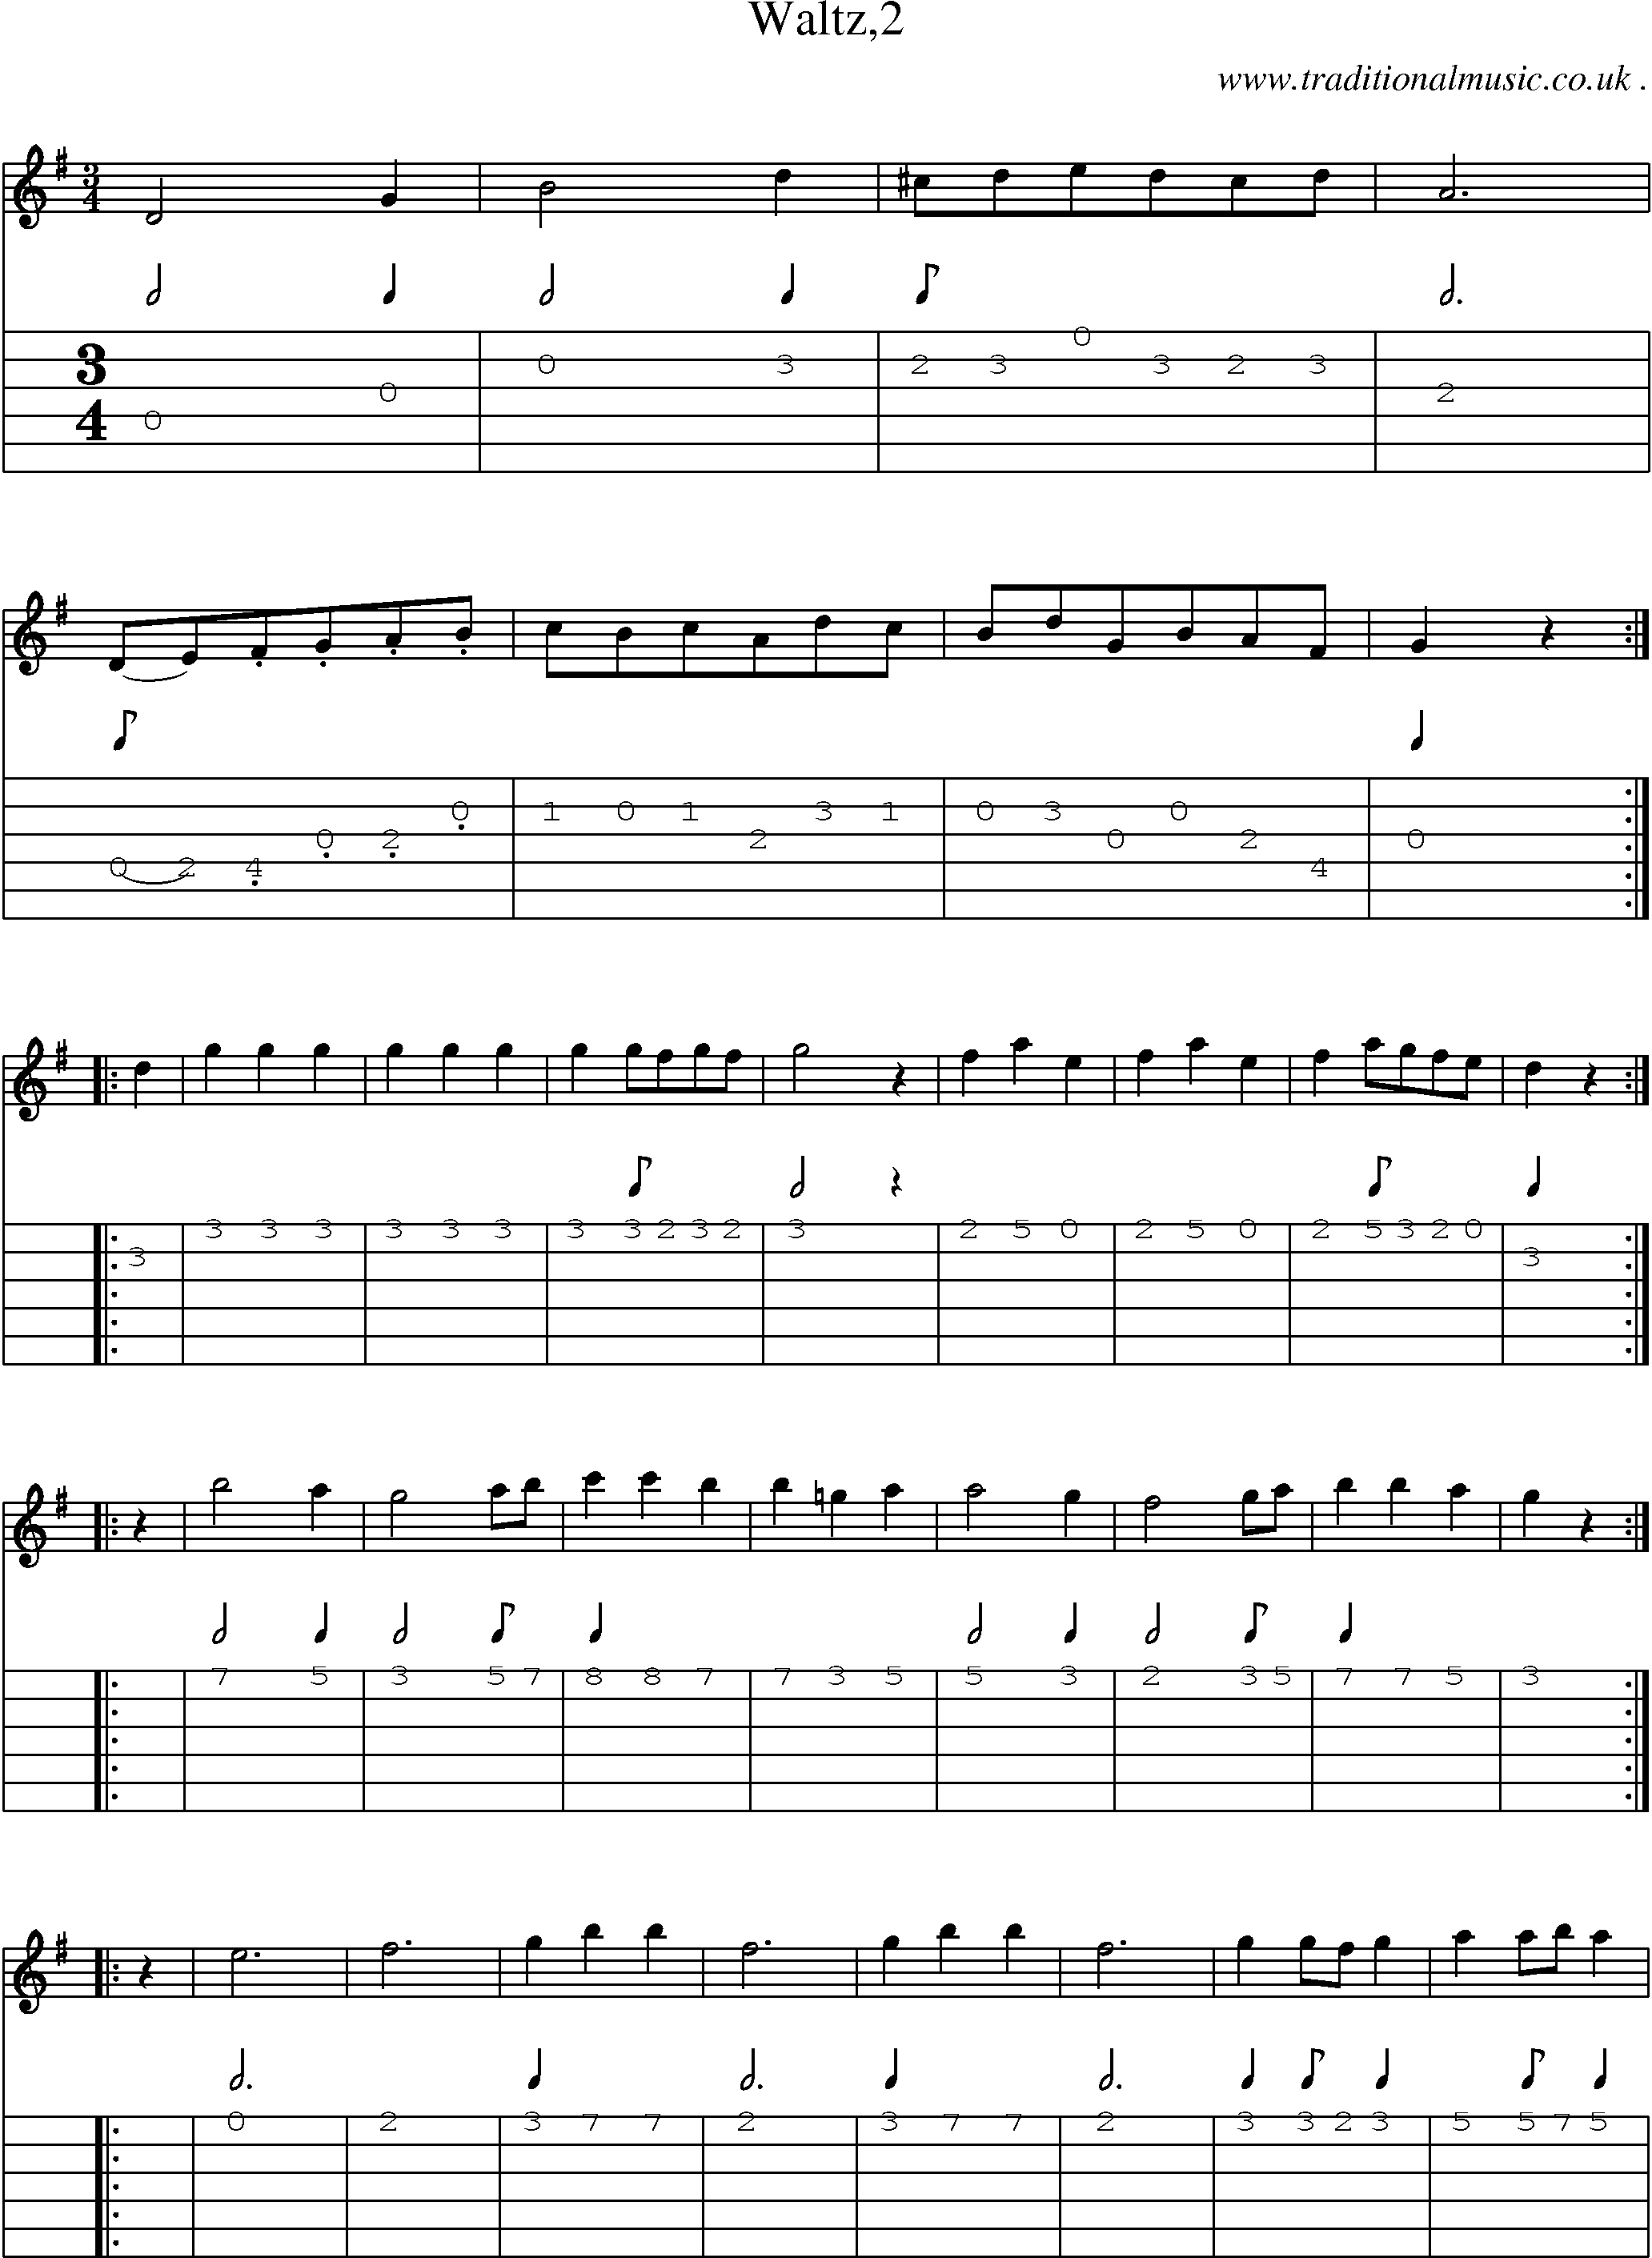 Sheet-Music and Guitar Tabs for Waltz2